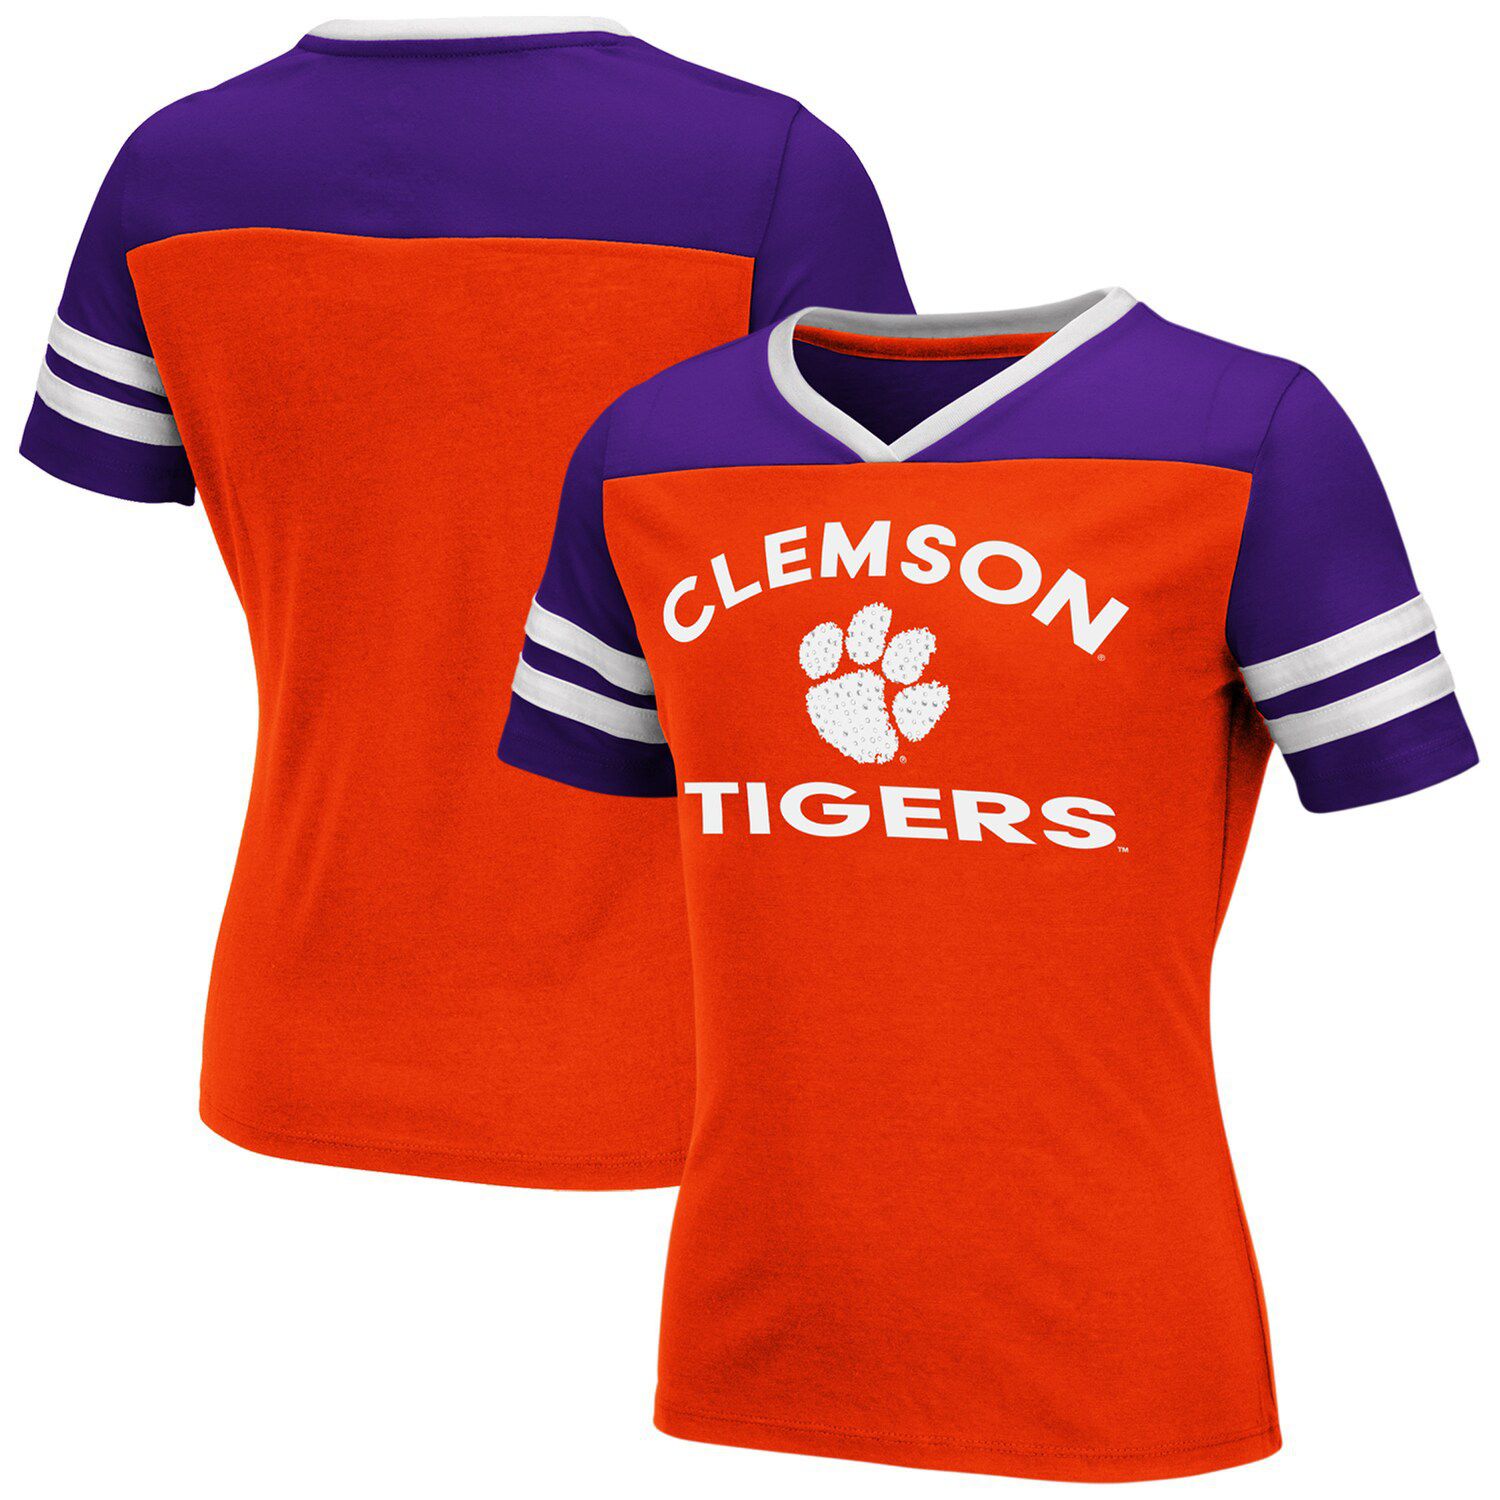 clemson youth jersey